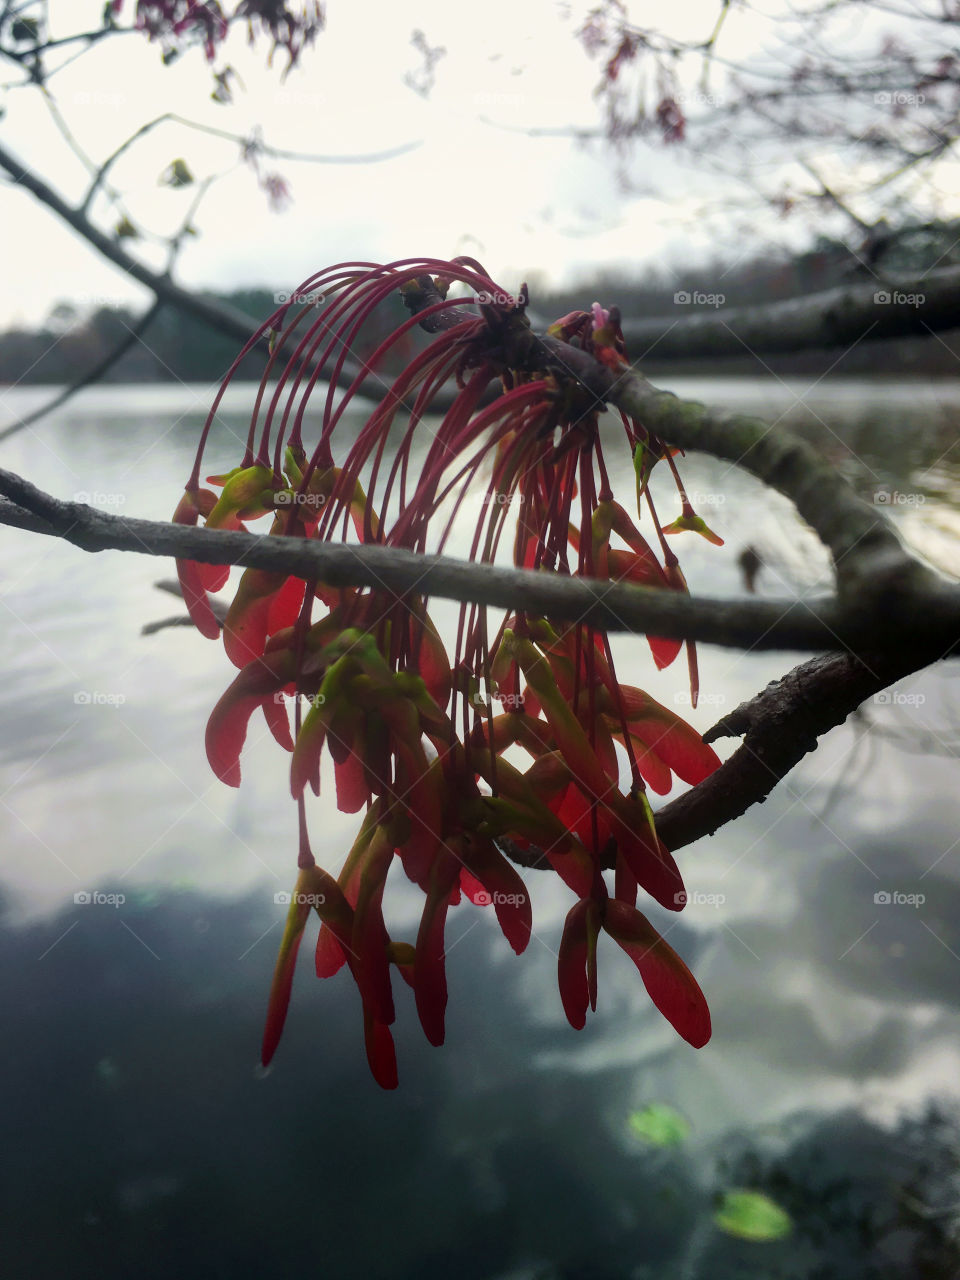 Cluster of bright red samaras or seed pods from the red maple trees signify early spring in North Carolina. 